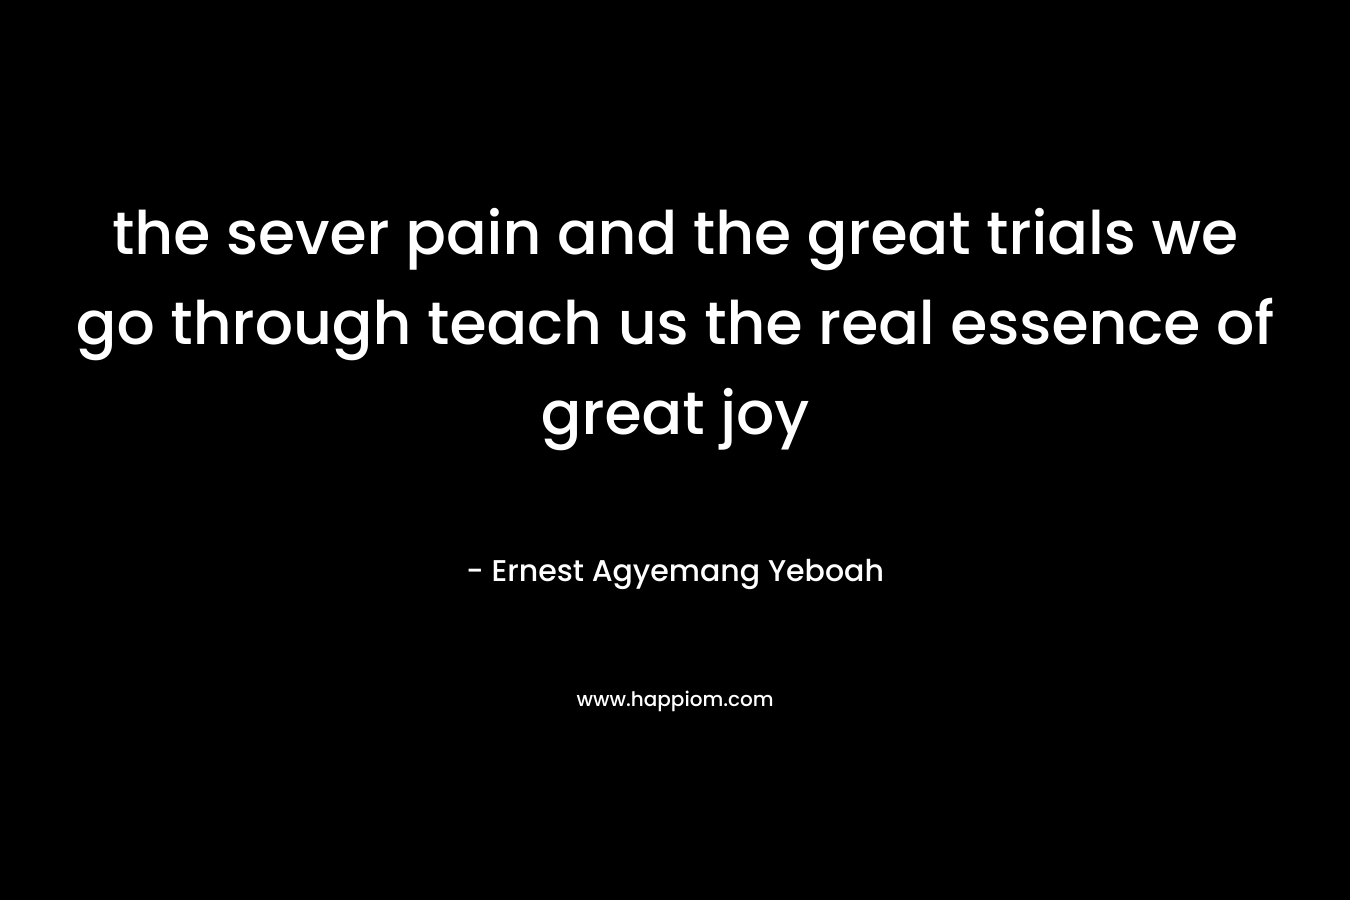 the sever pain and the great trials we go through teach us the real essence of great joy – Ernest Agyemang Yeboah